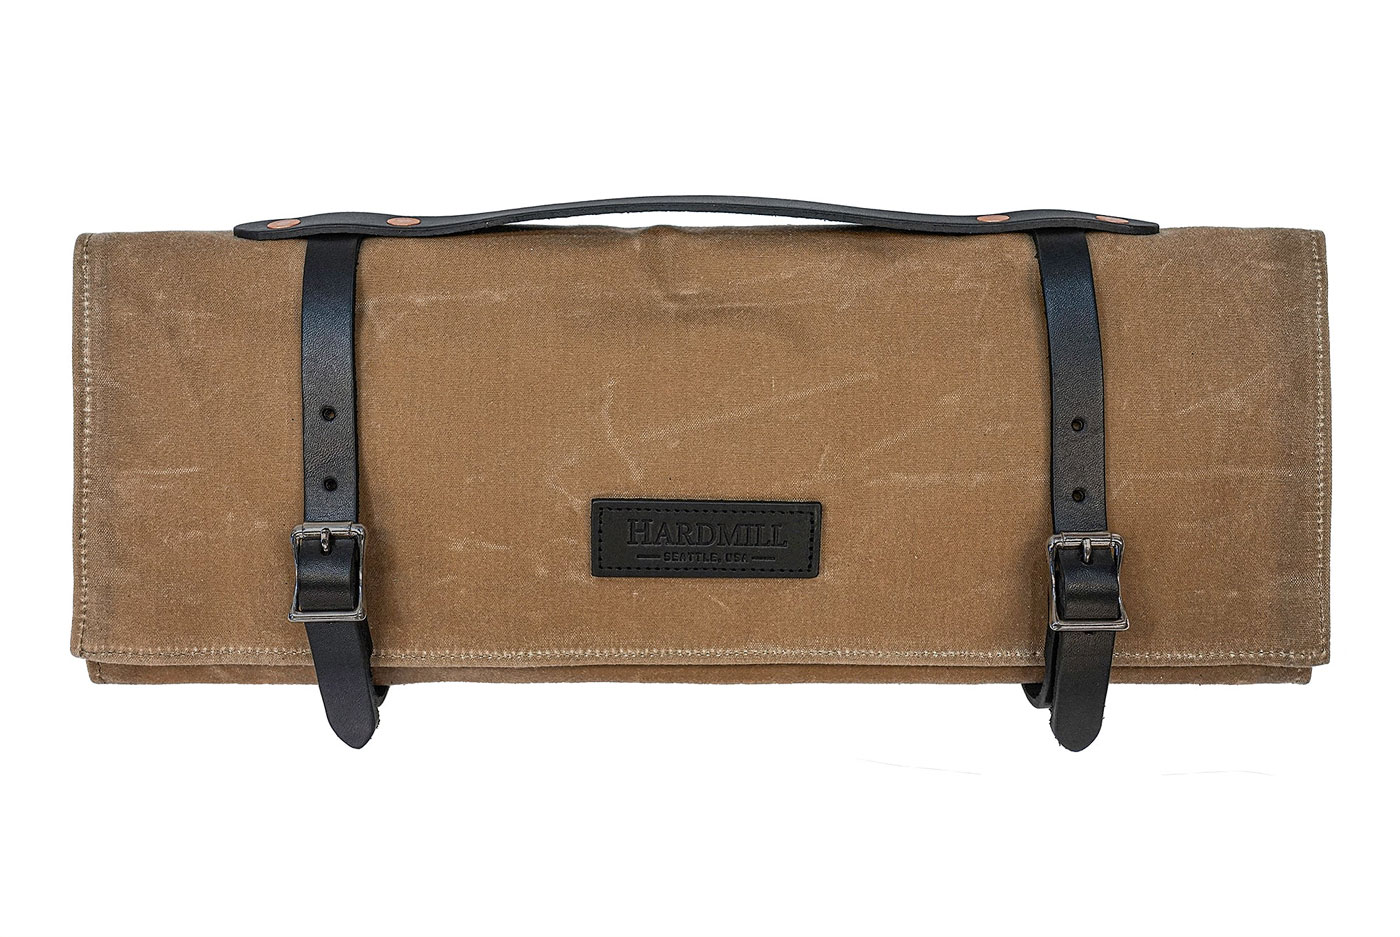 10 Pocket Waxed Canvas Knife Roll with Leather Trim - Field Tan (KR-WC-FT)